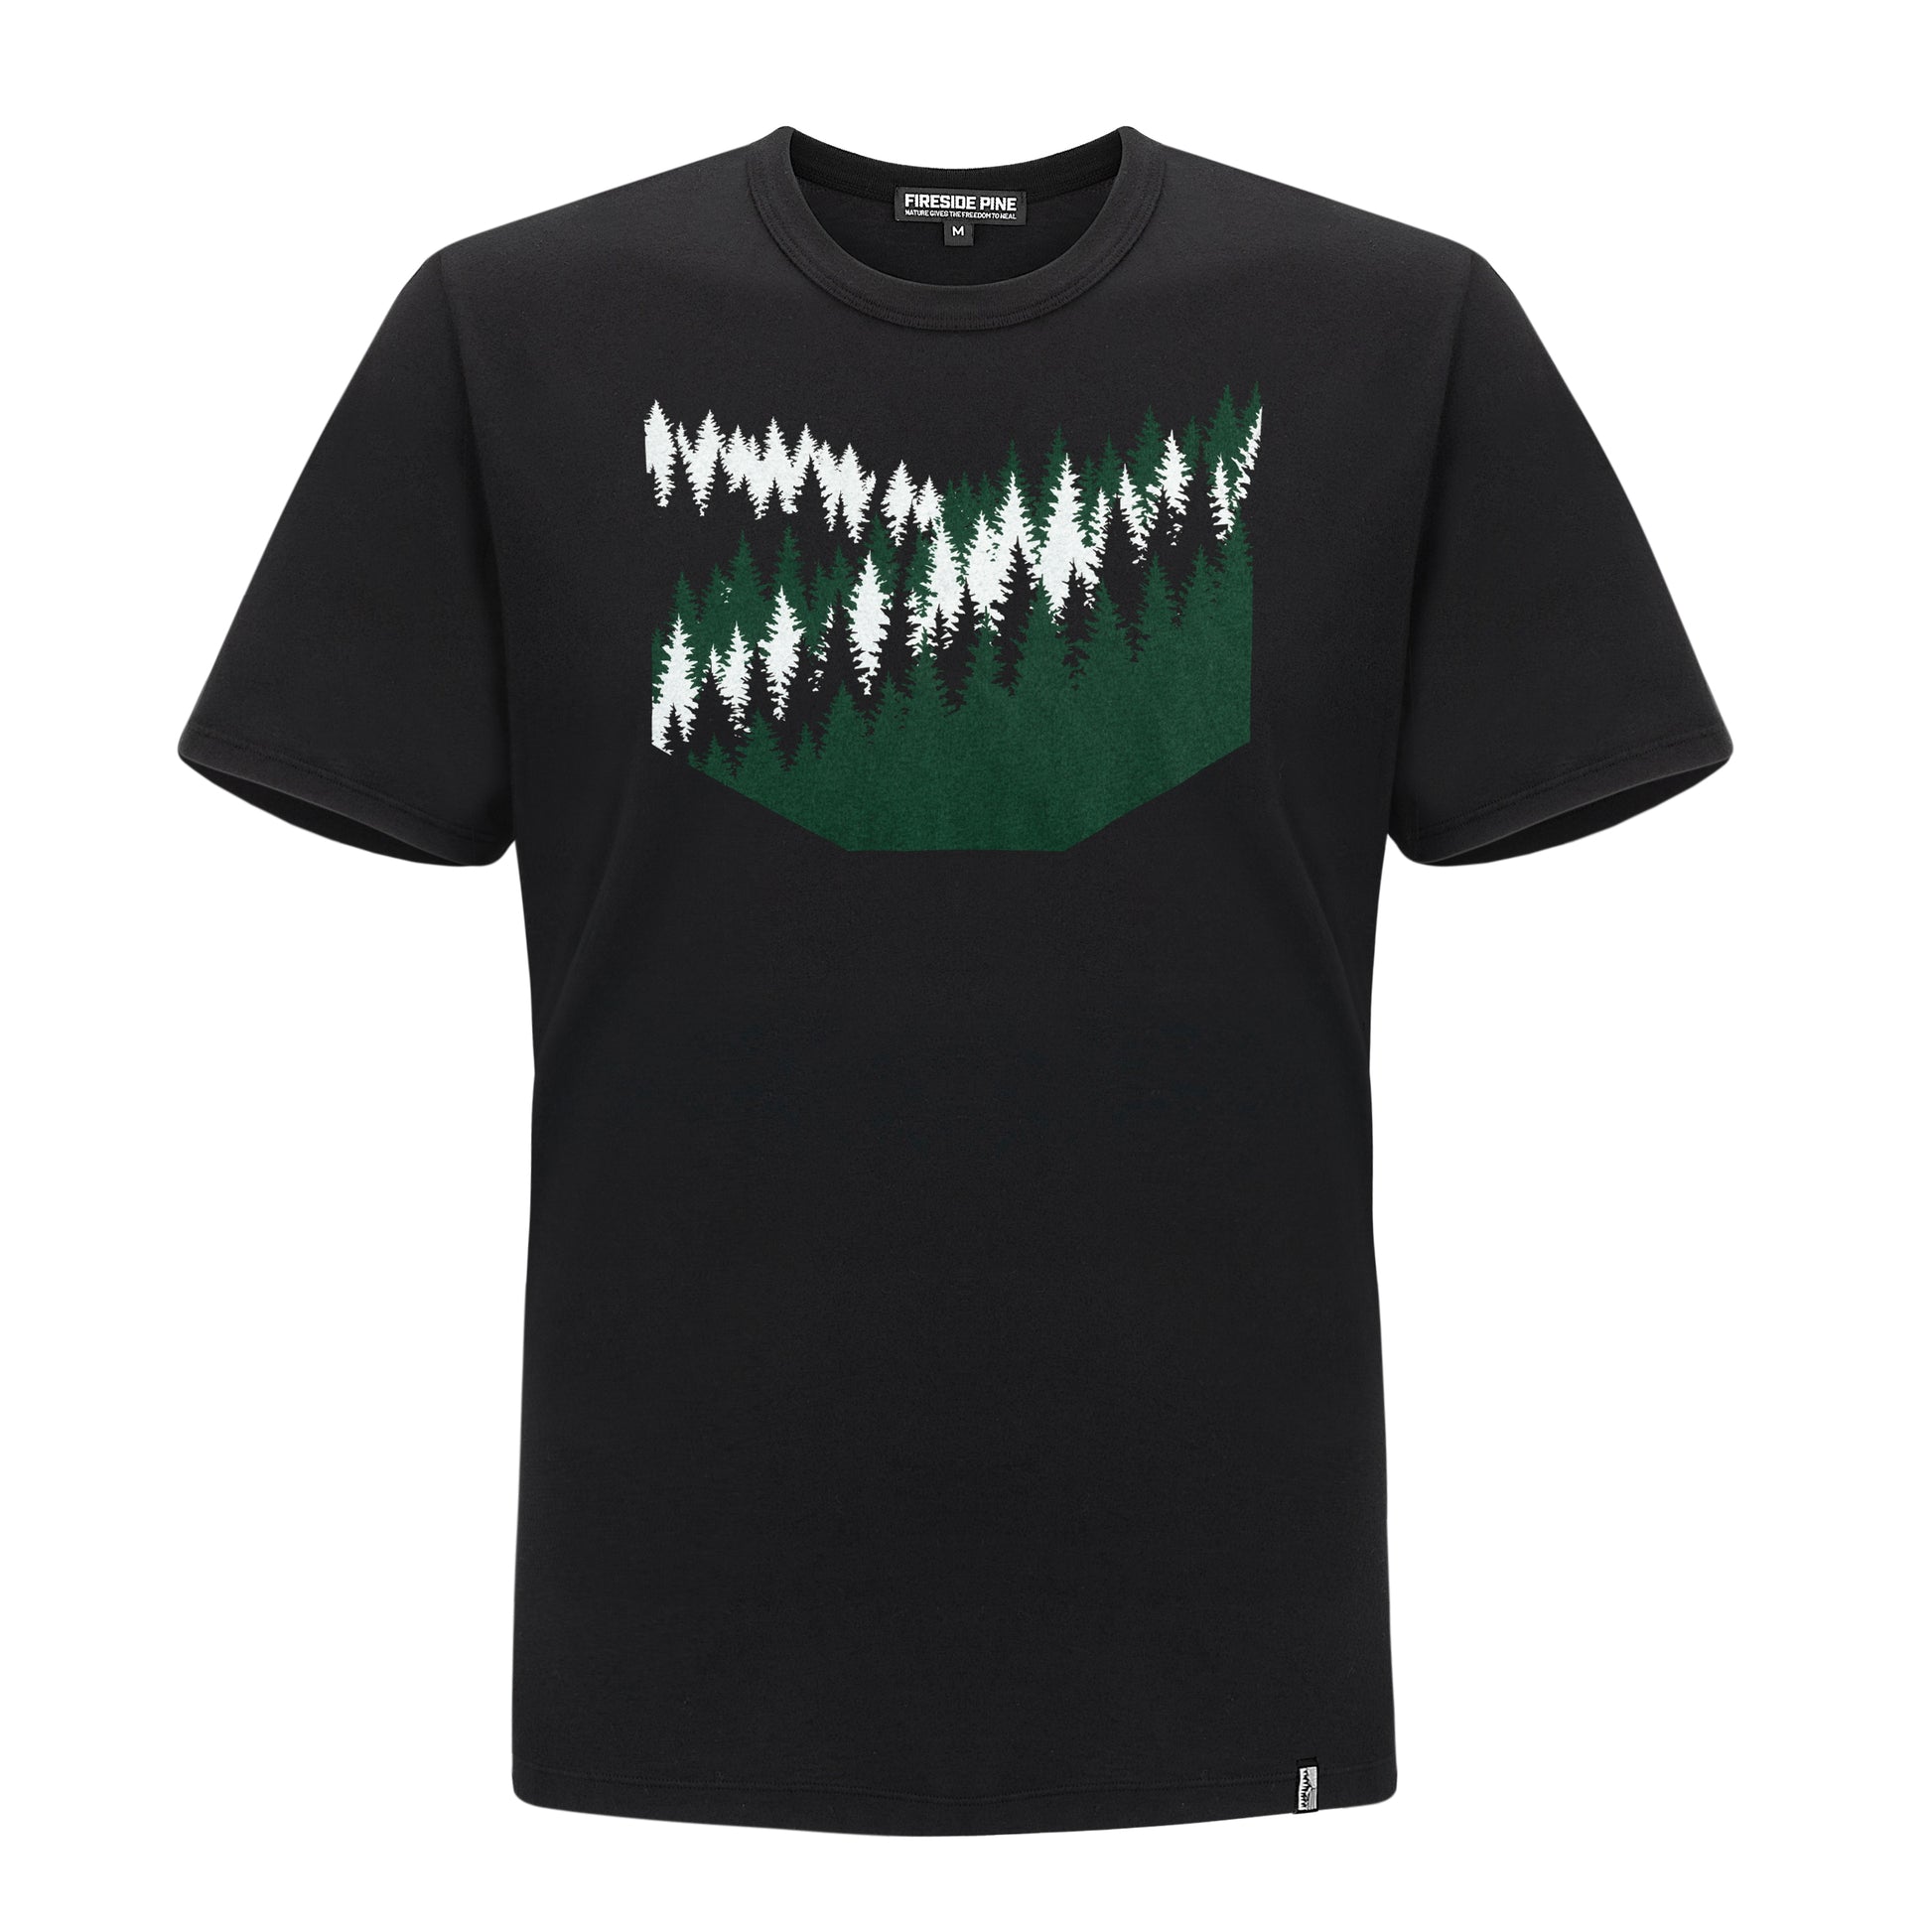 An environmentally conscious Relaxed Fit T-Shirt, proudly made in the USA and crafted with care from a blend of 50% Modal and 50% Cotton. This T-shirt features a 3 color pine tree forest graphic inspired by the Pacific North West. Front View.